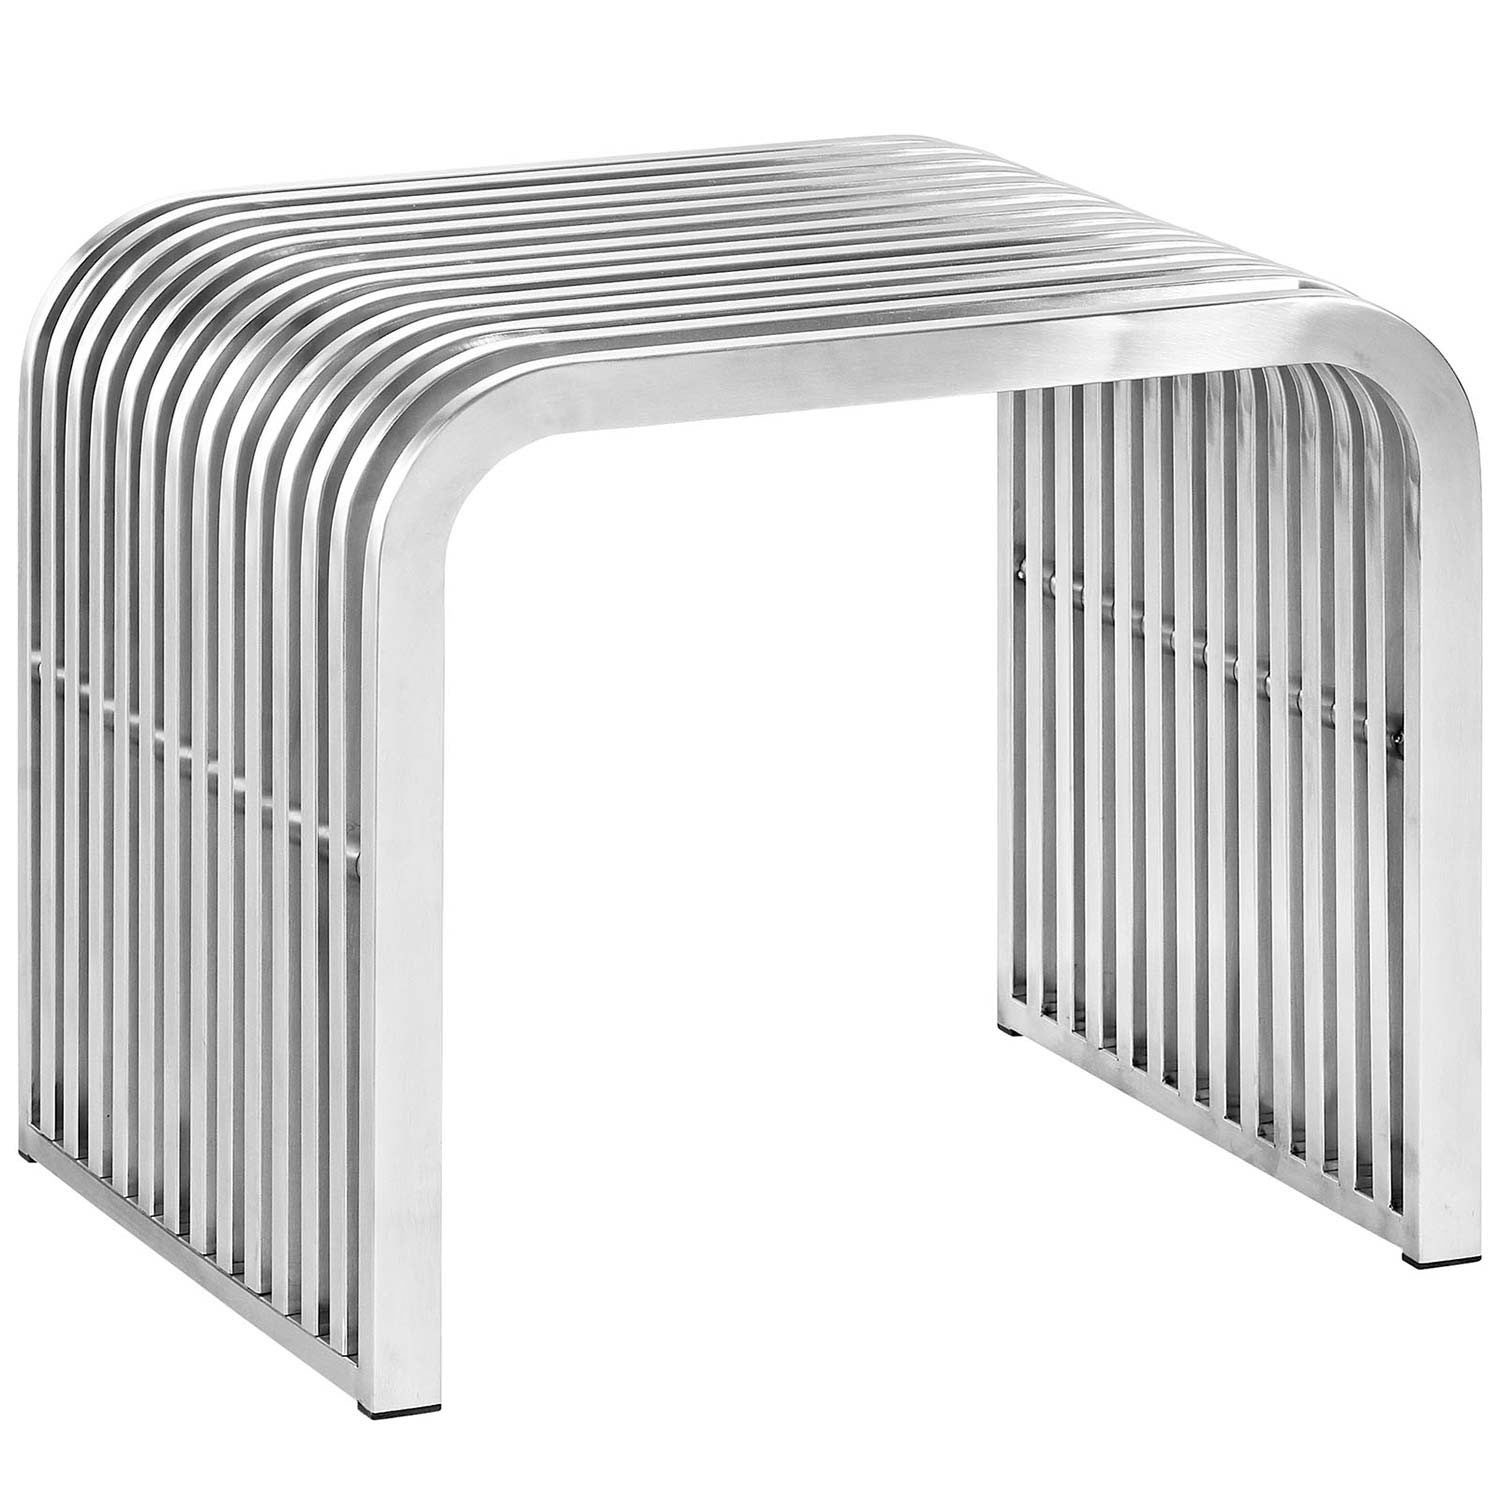 Modway Pipe Stainless Steel Bench - Silver